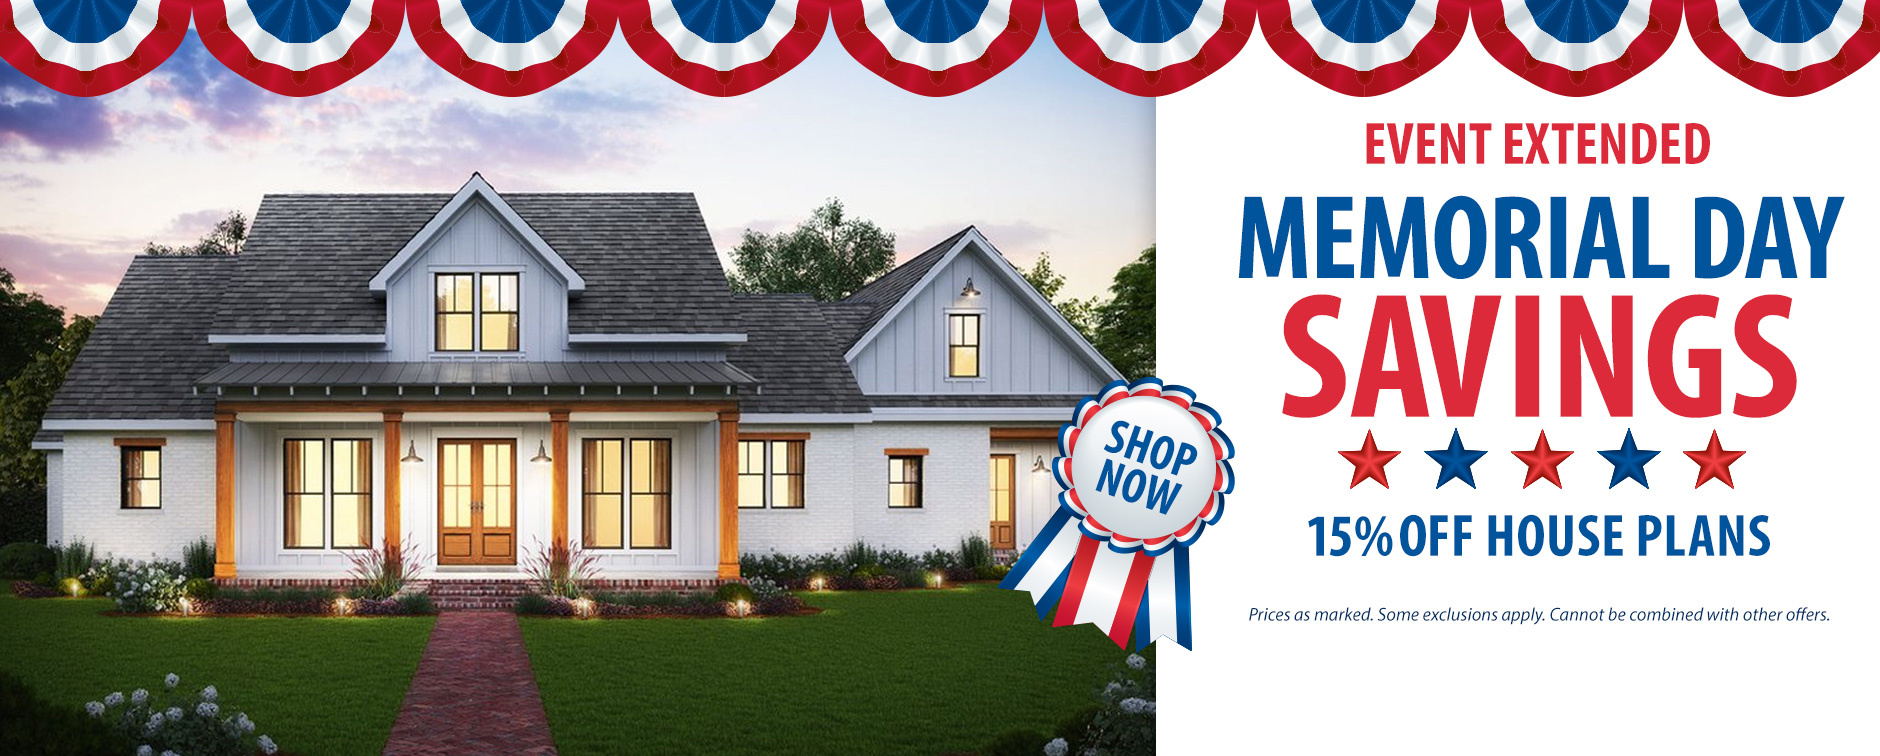 Memorial Day Savings Extended: 15% Off House Plans